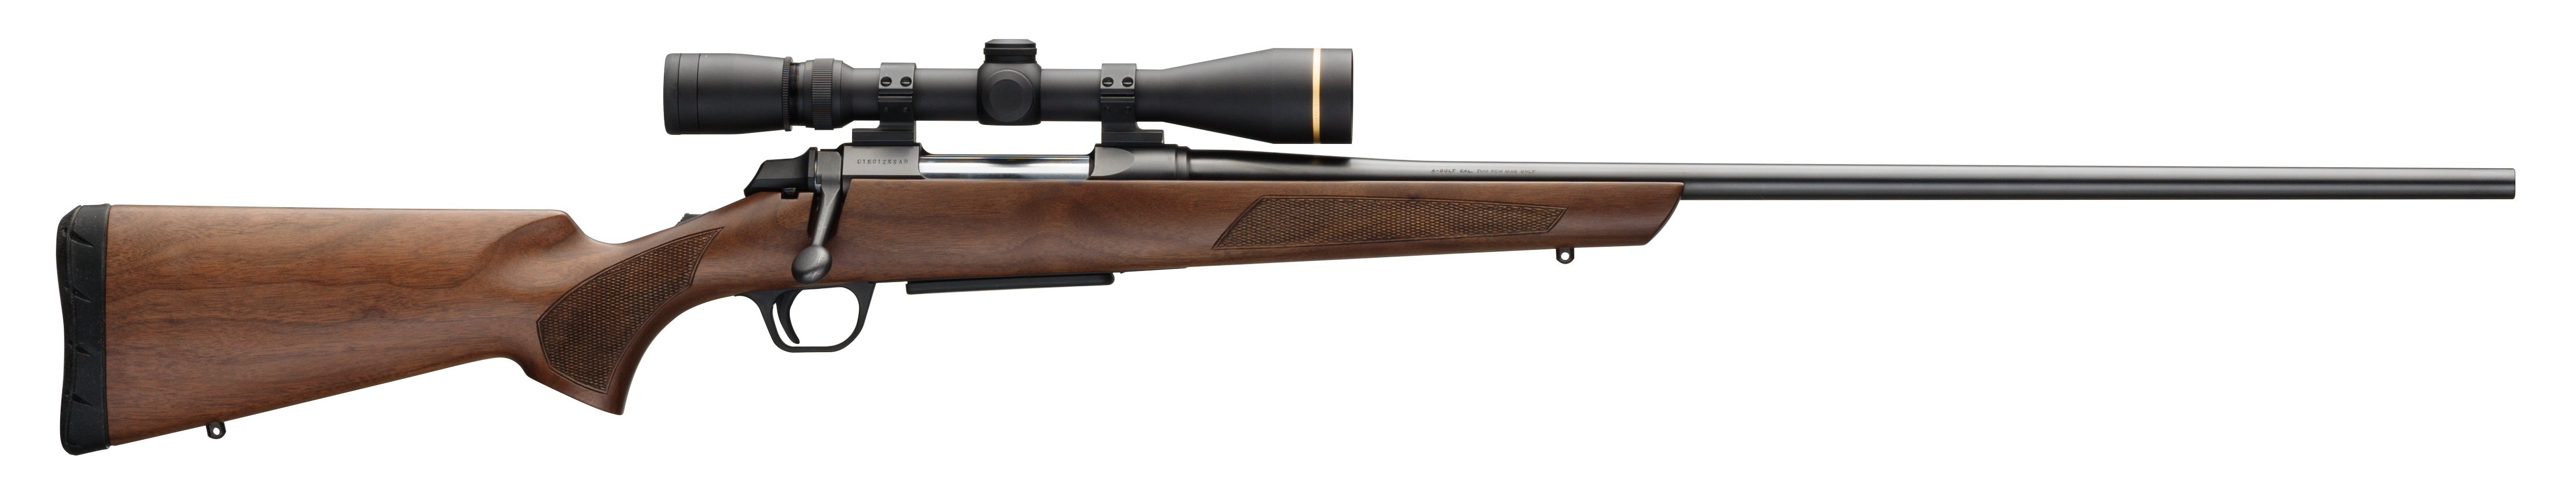 RIFLE BROWNING A-BOLT 3 HUNTER CALIBRE .308 WINCHESTER